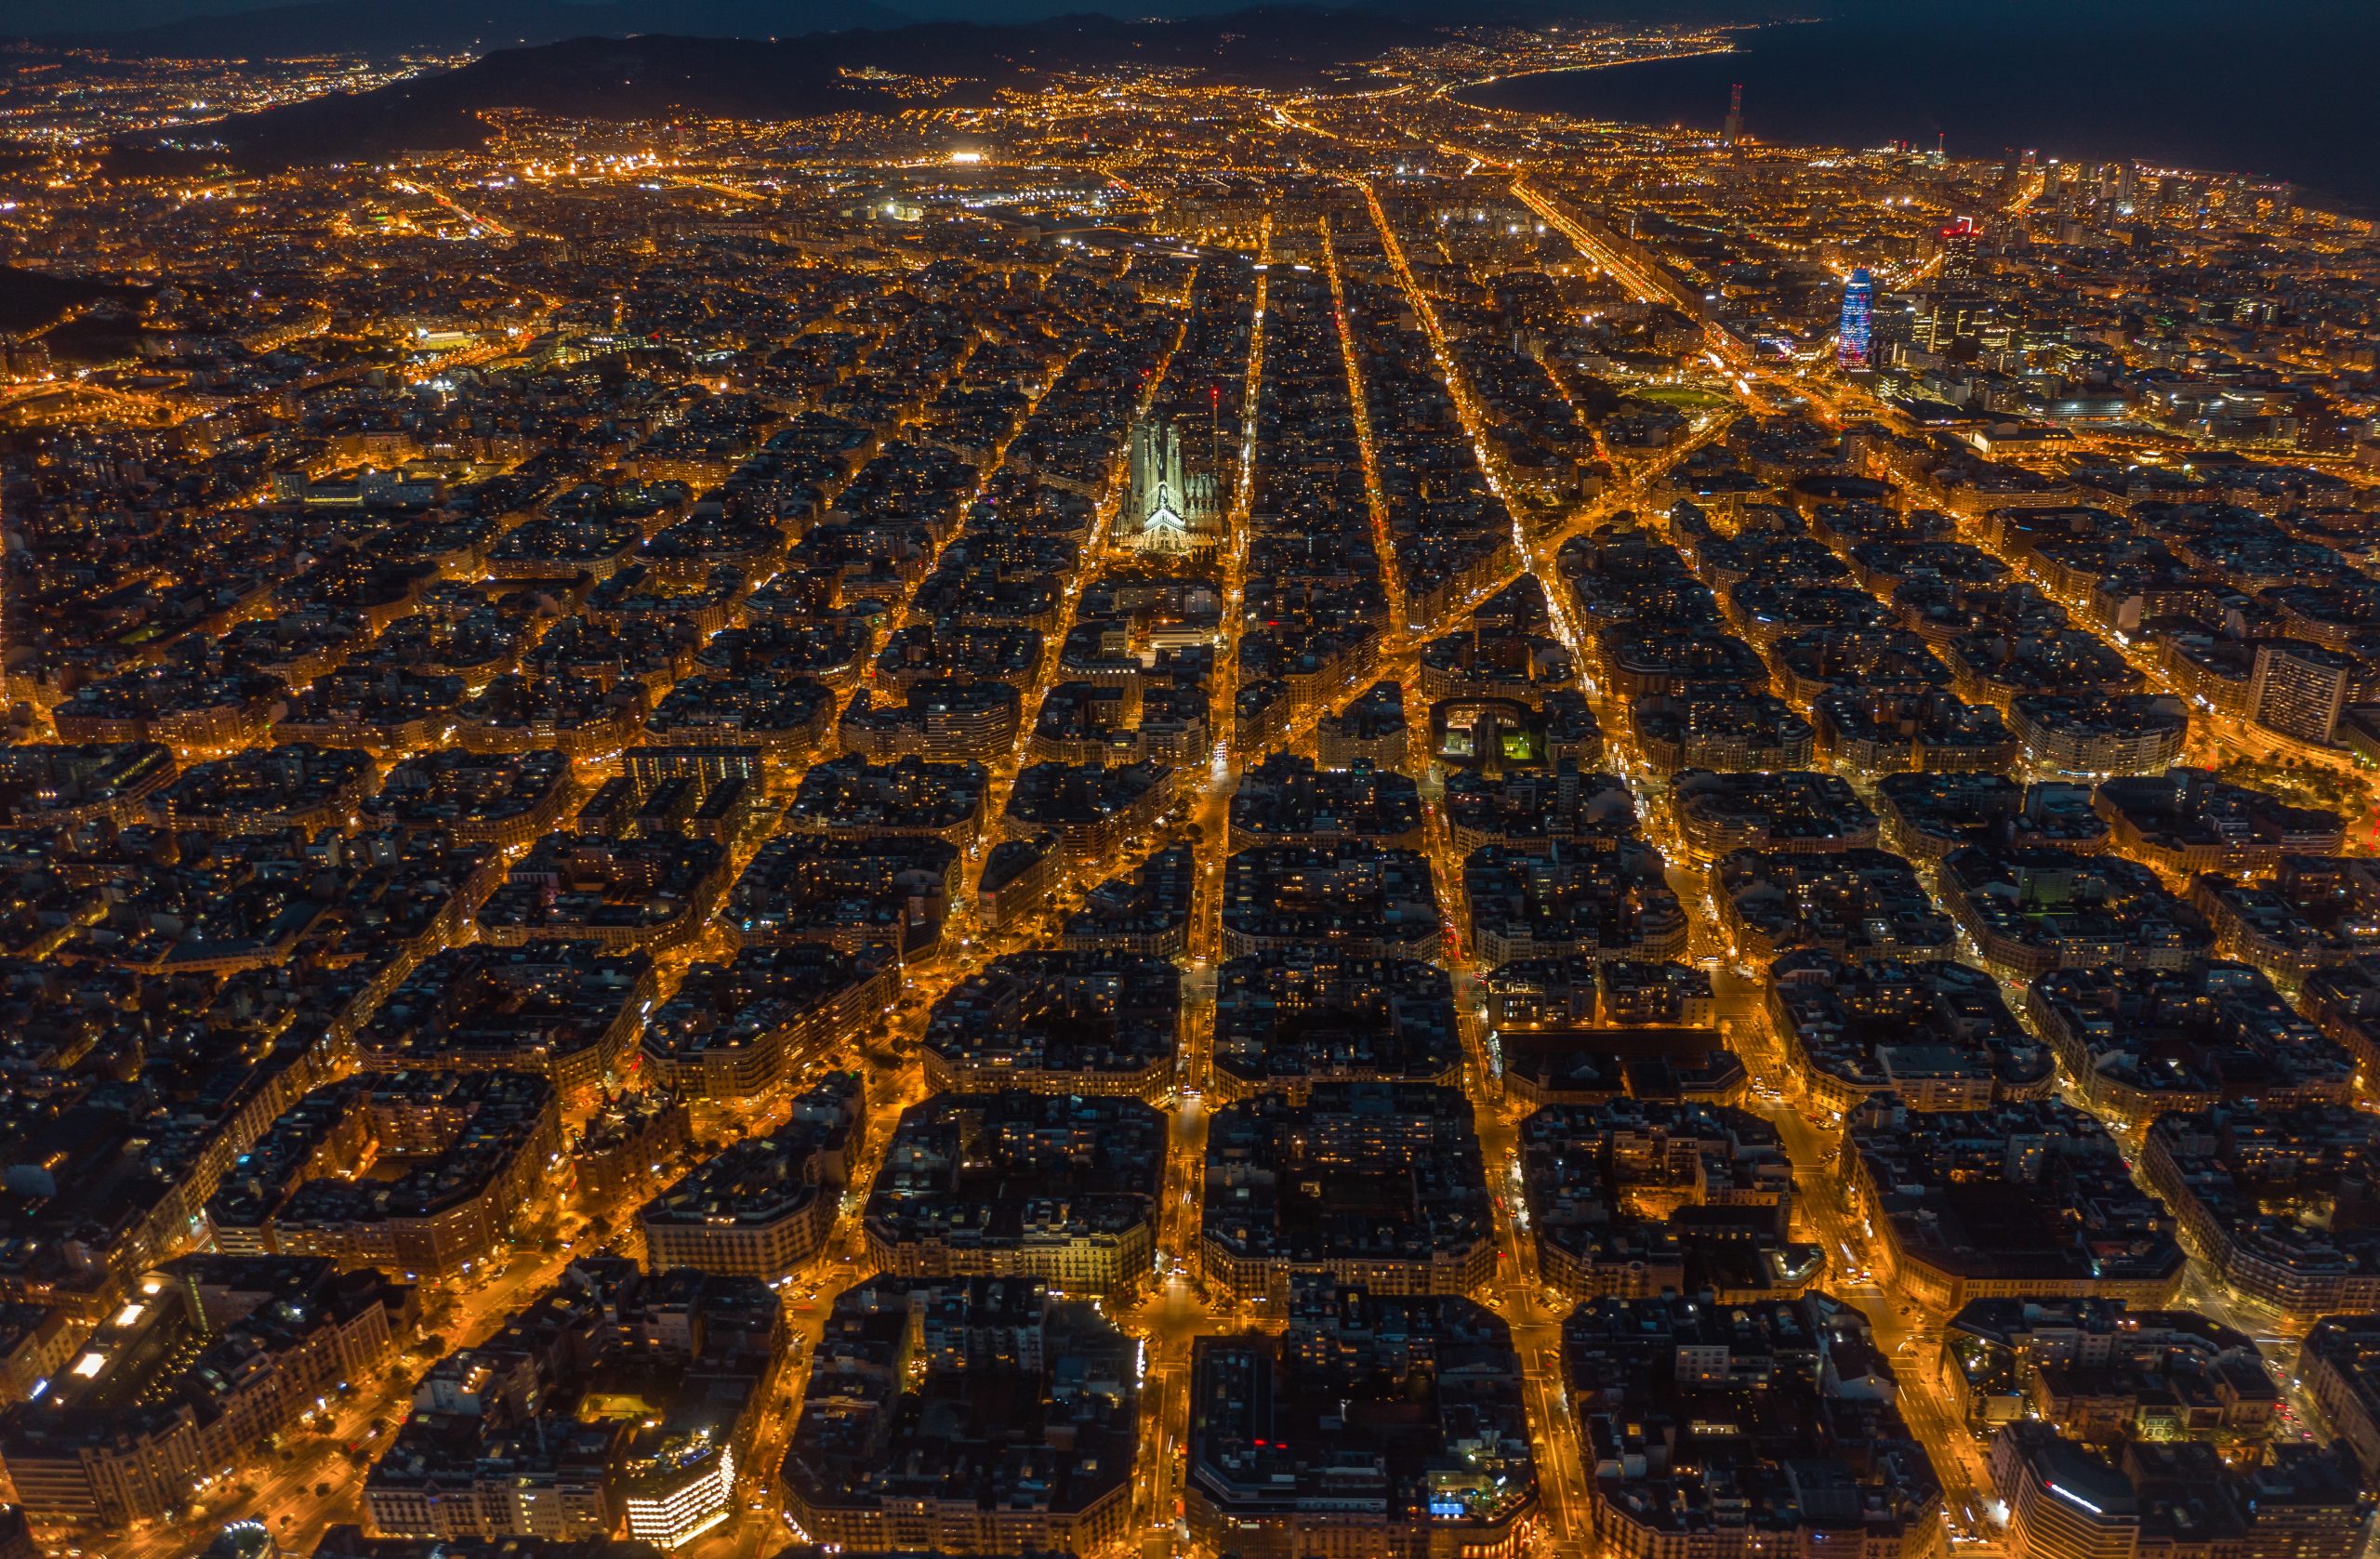 Read more about the article The economic future and resilience of the Eixample. What an economic model for the Eixample and the metropolis: from tourism to innovation